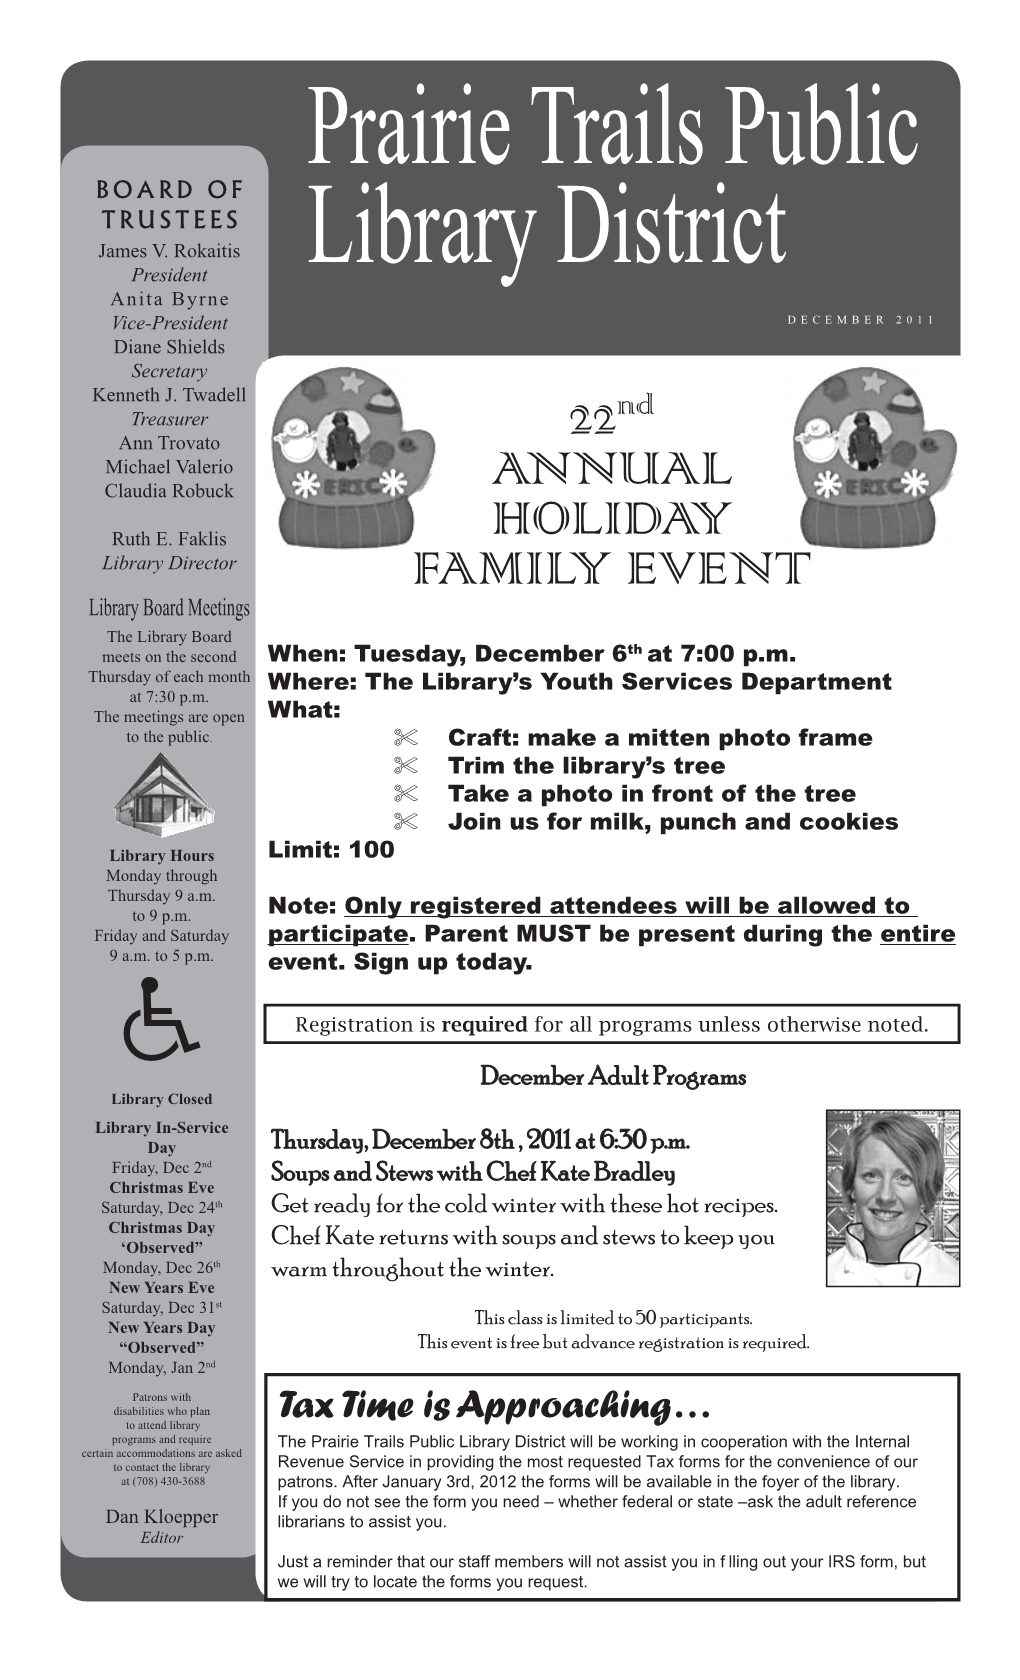 22Nd ANNUAL HOLIDAY FAMILY EVENT